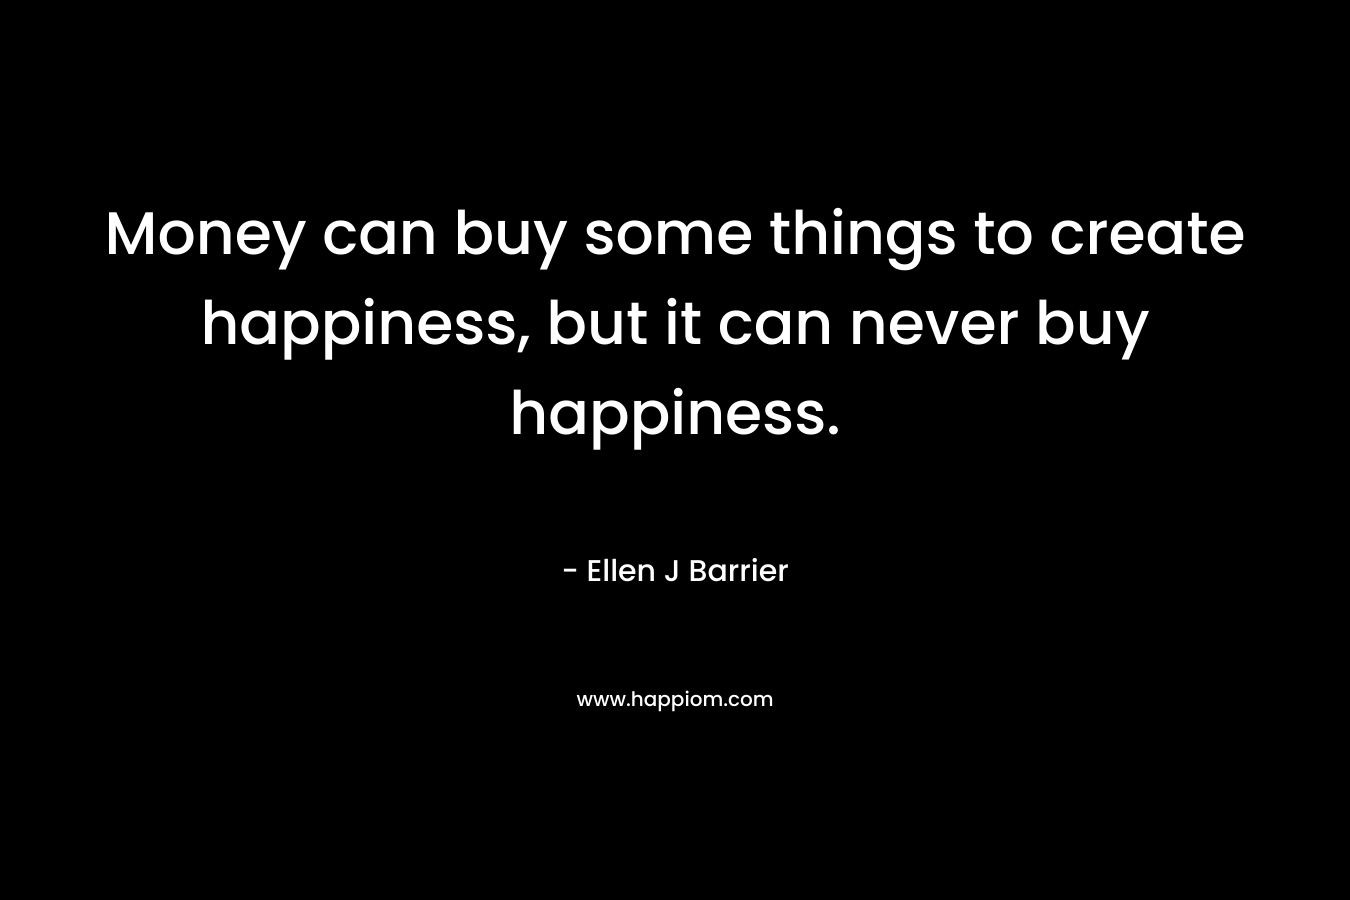 Money can buy some things to create happiness, but it can never buy happiness.